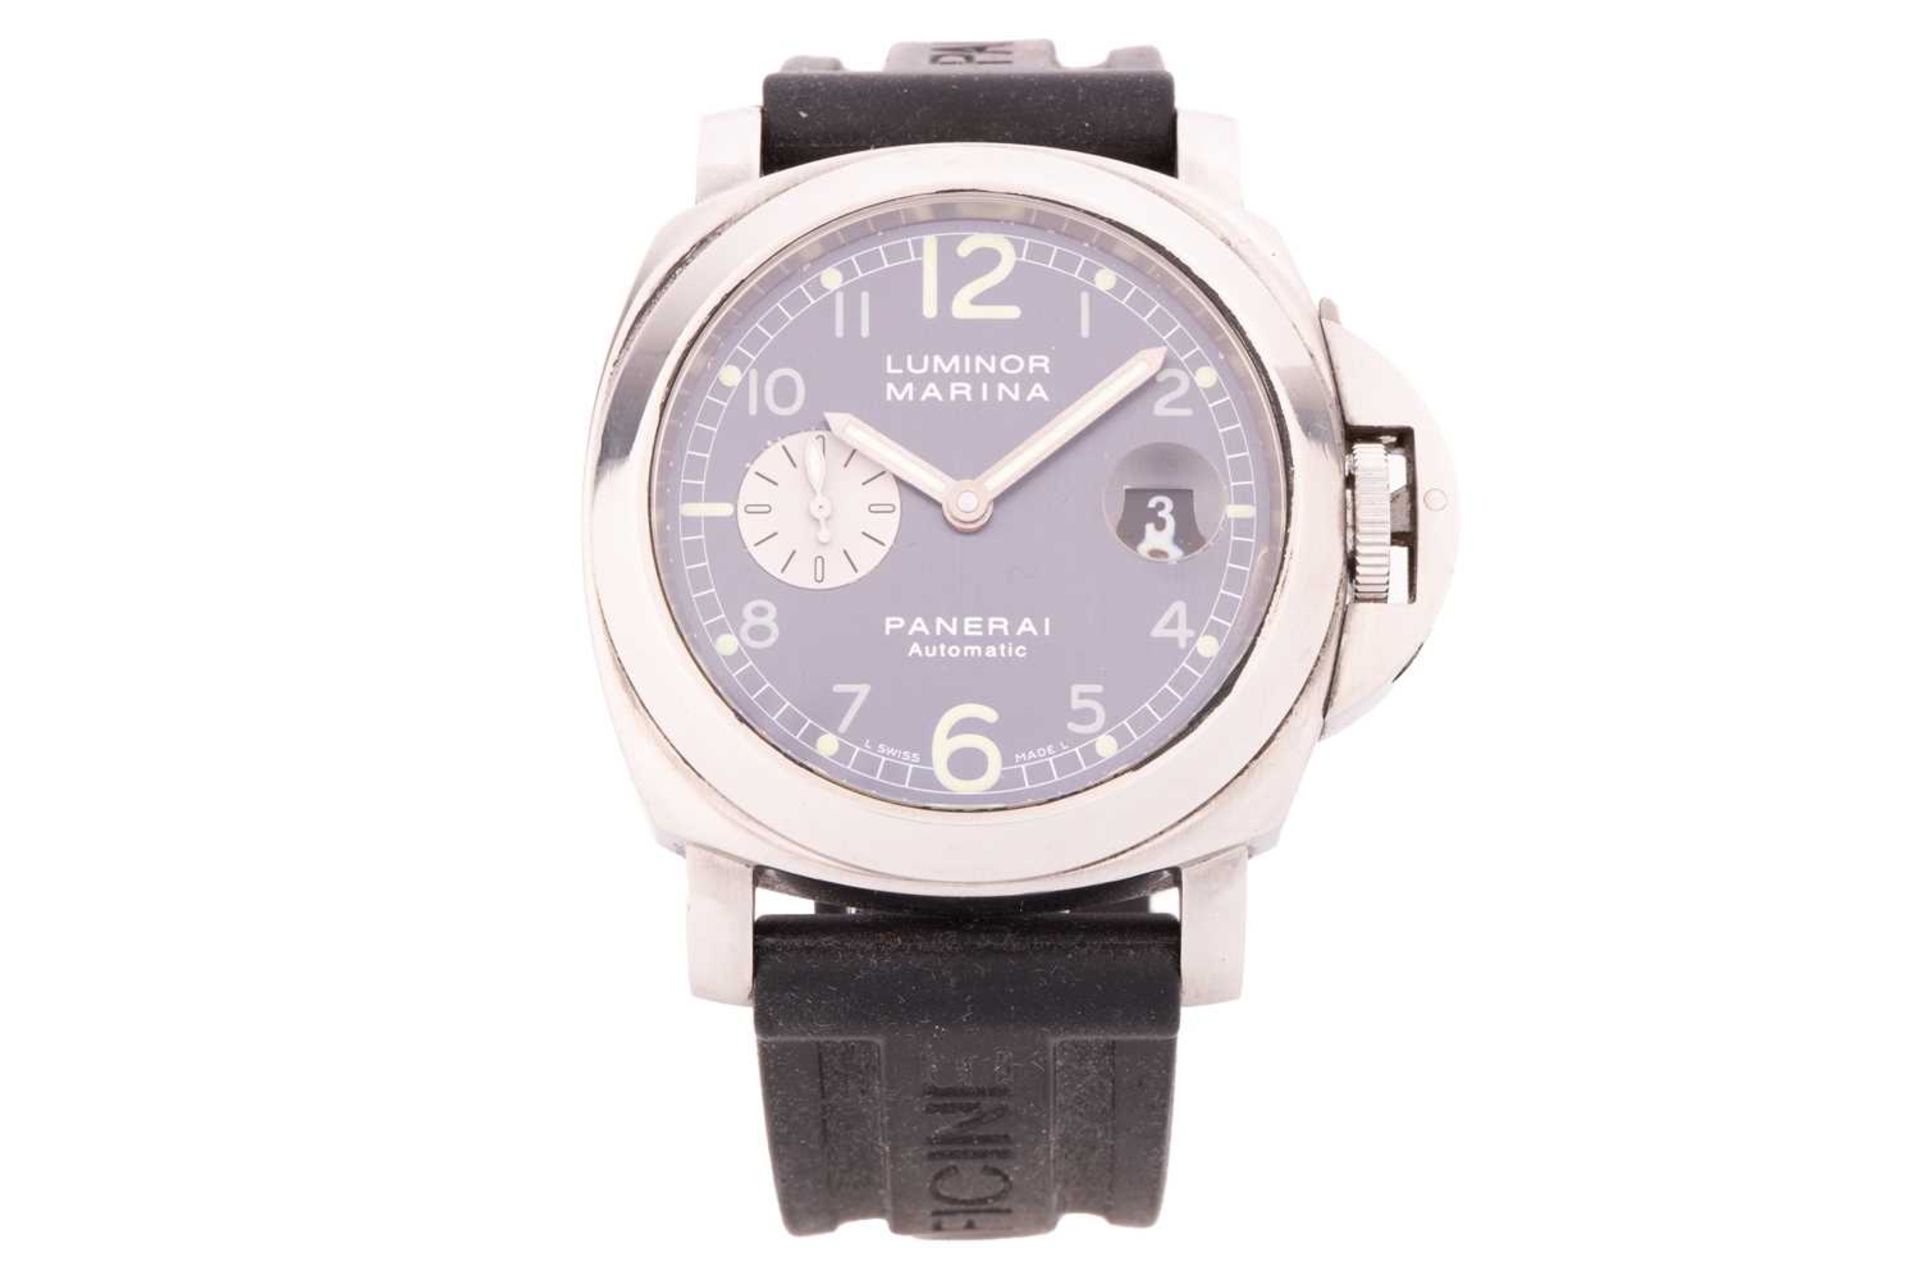 A Panerai Luminor Marina automatic PAM0086, featuring a Swiss-made automatic movement in a steel